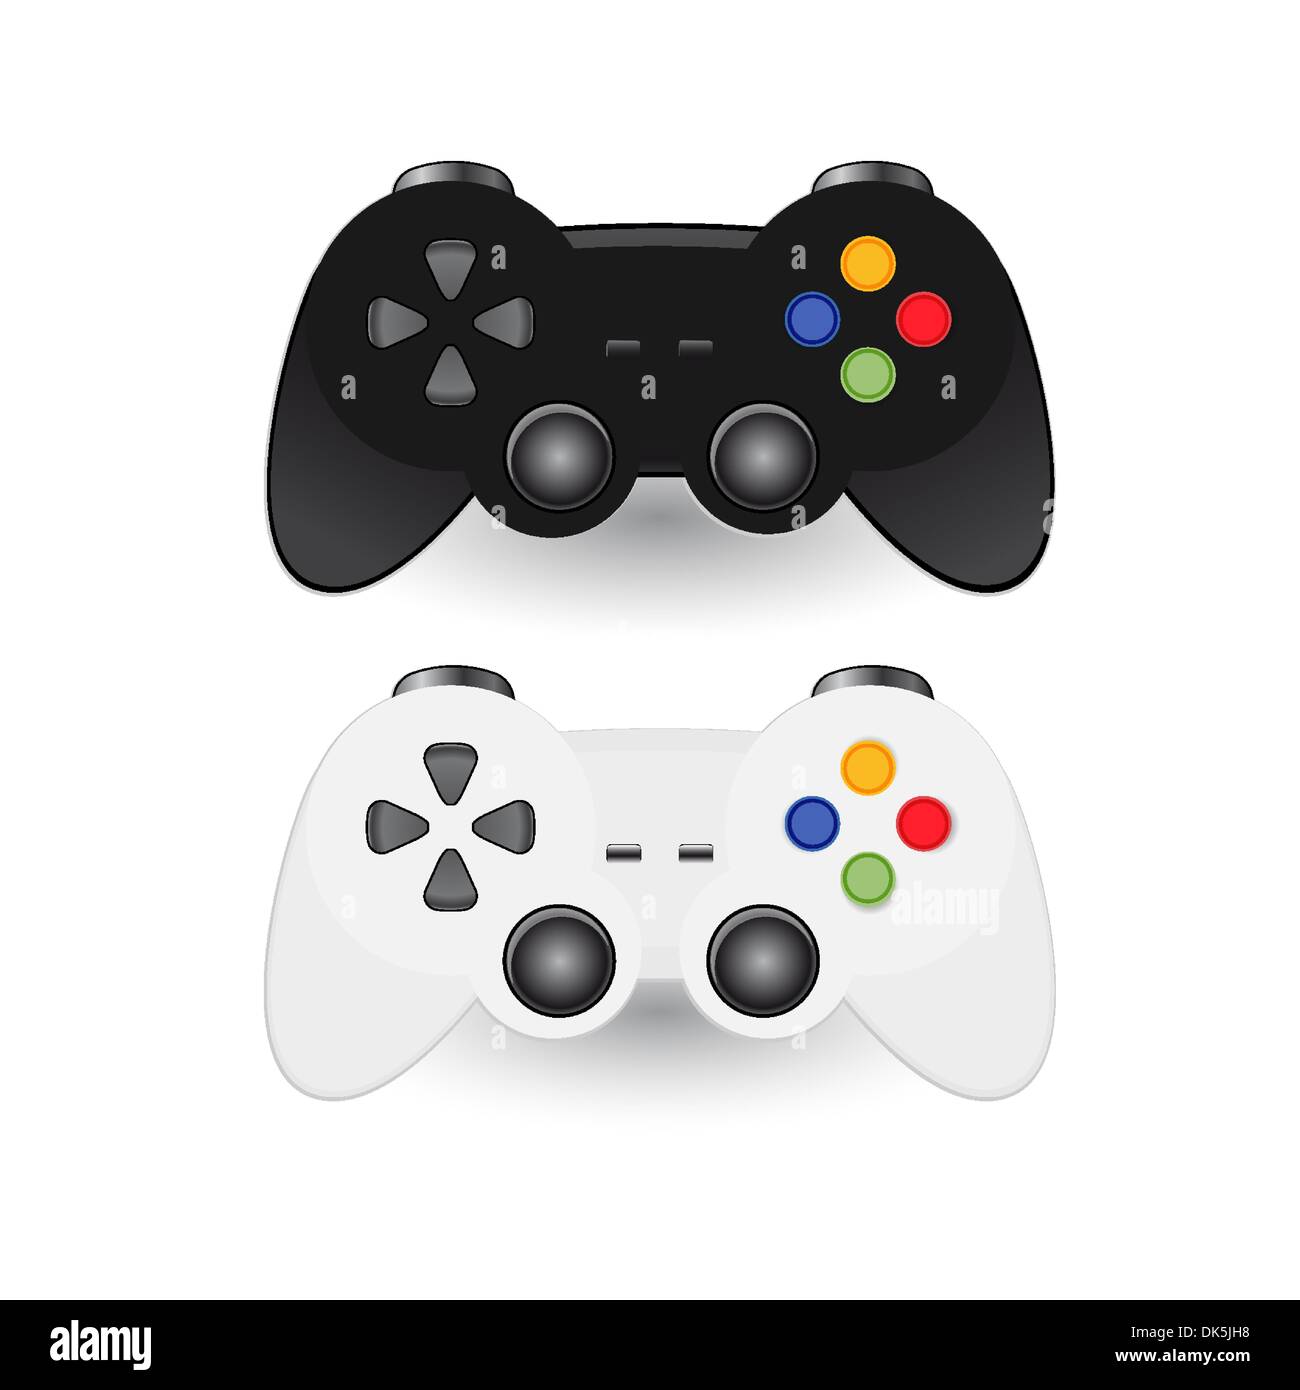 Illustration of Game pad Joystic Stock Vector